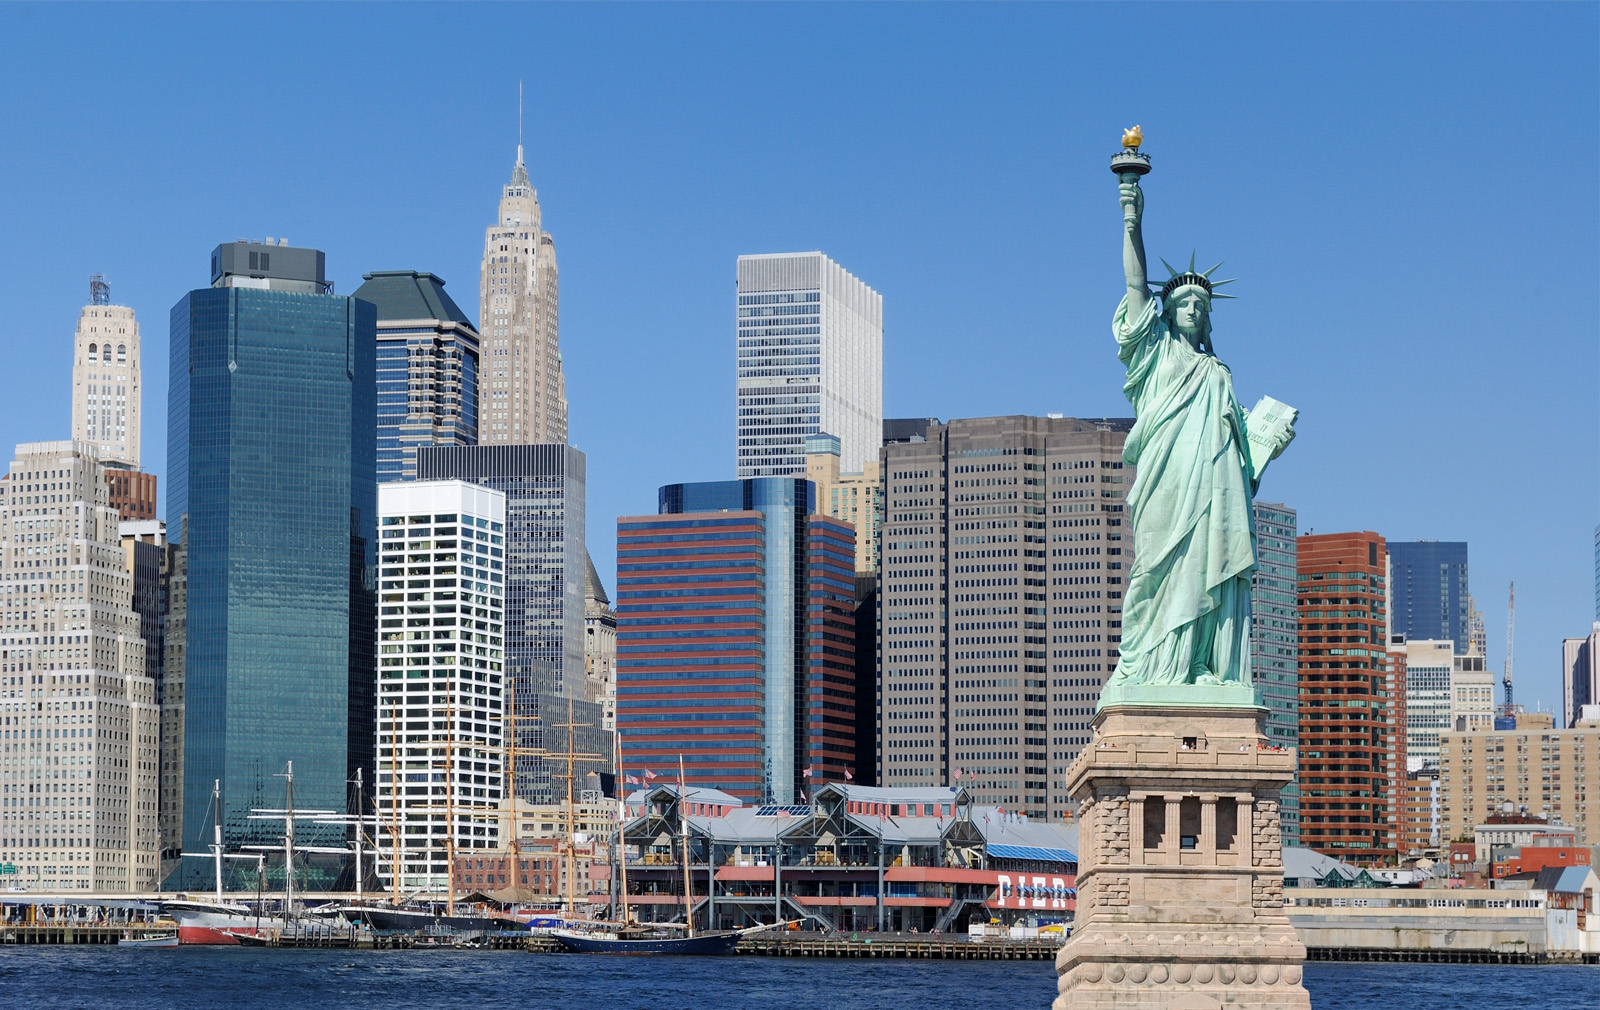 Statue of Liberty and New York City